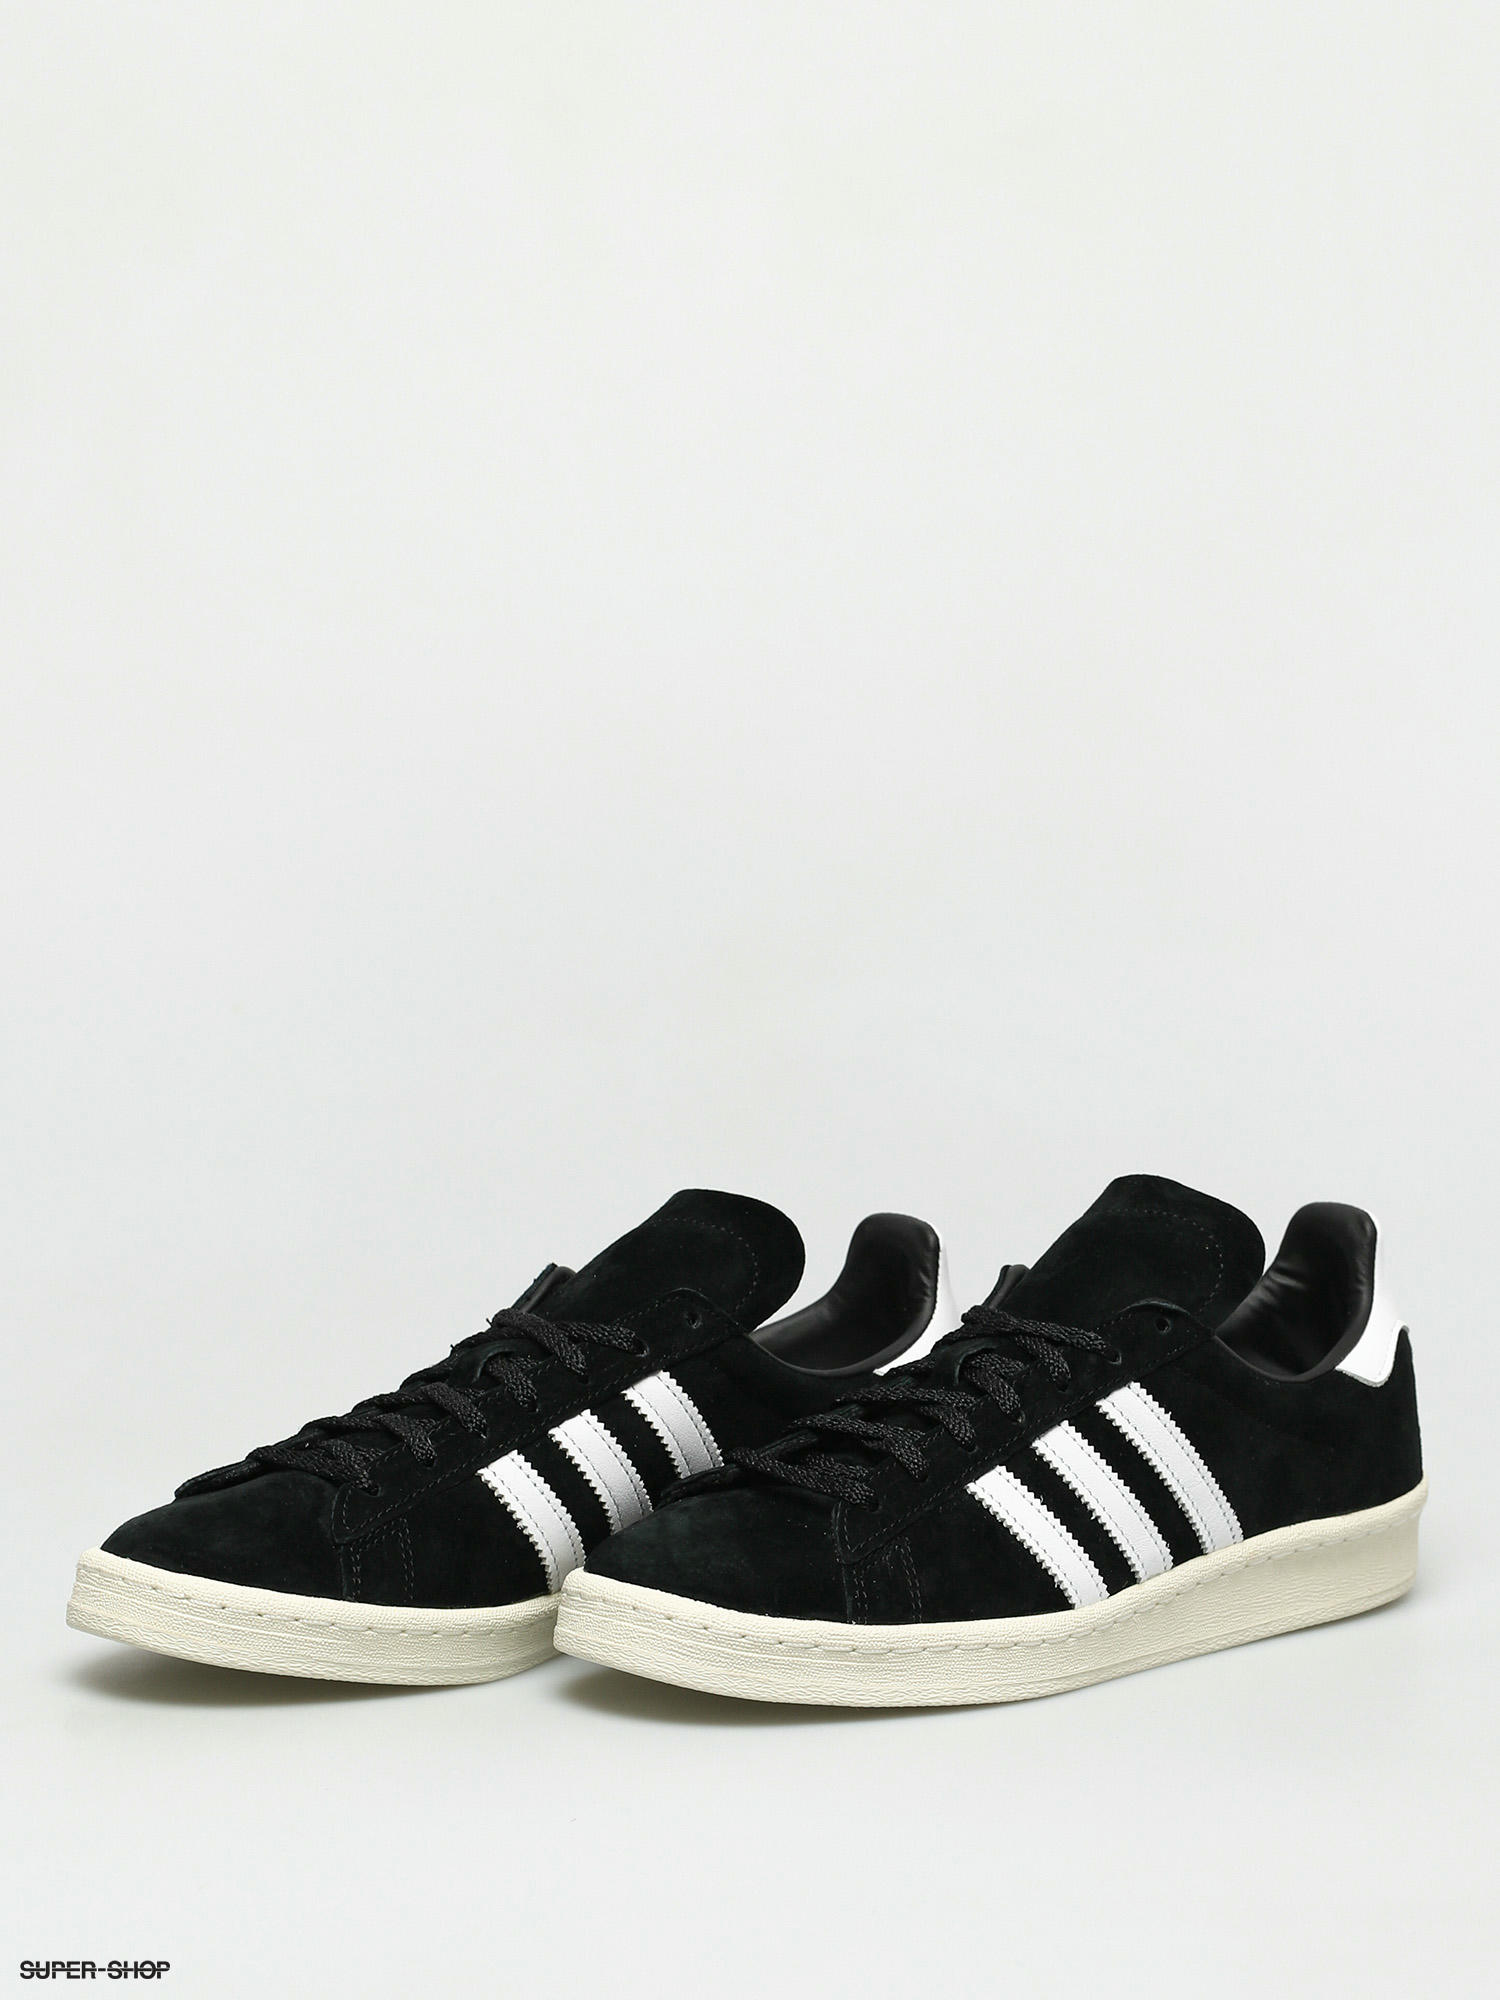 adidas campus 80s shoes